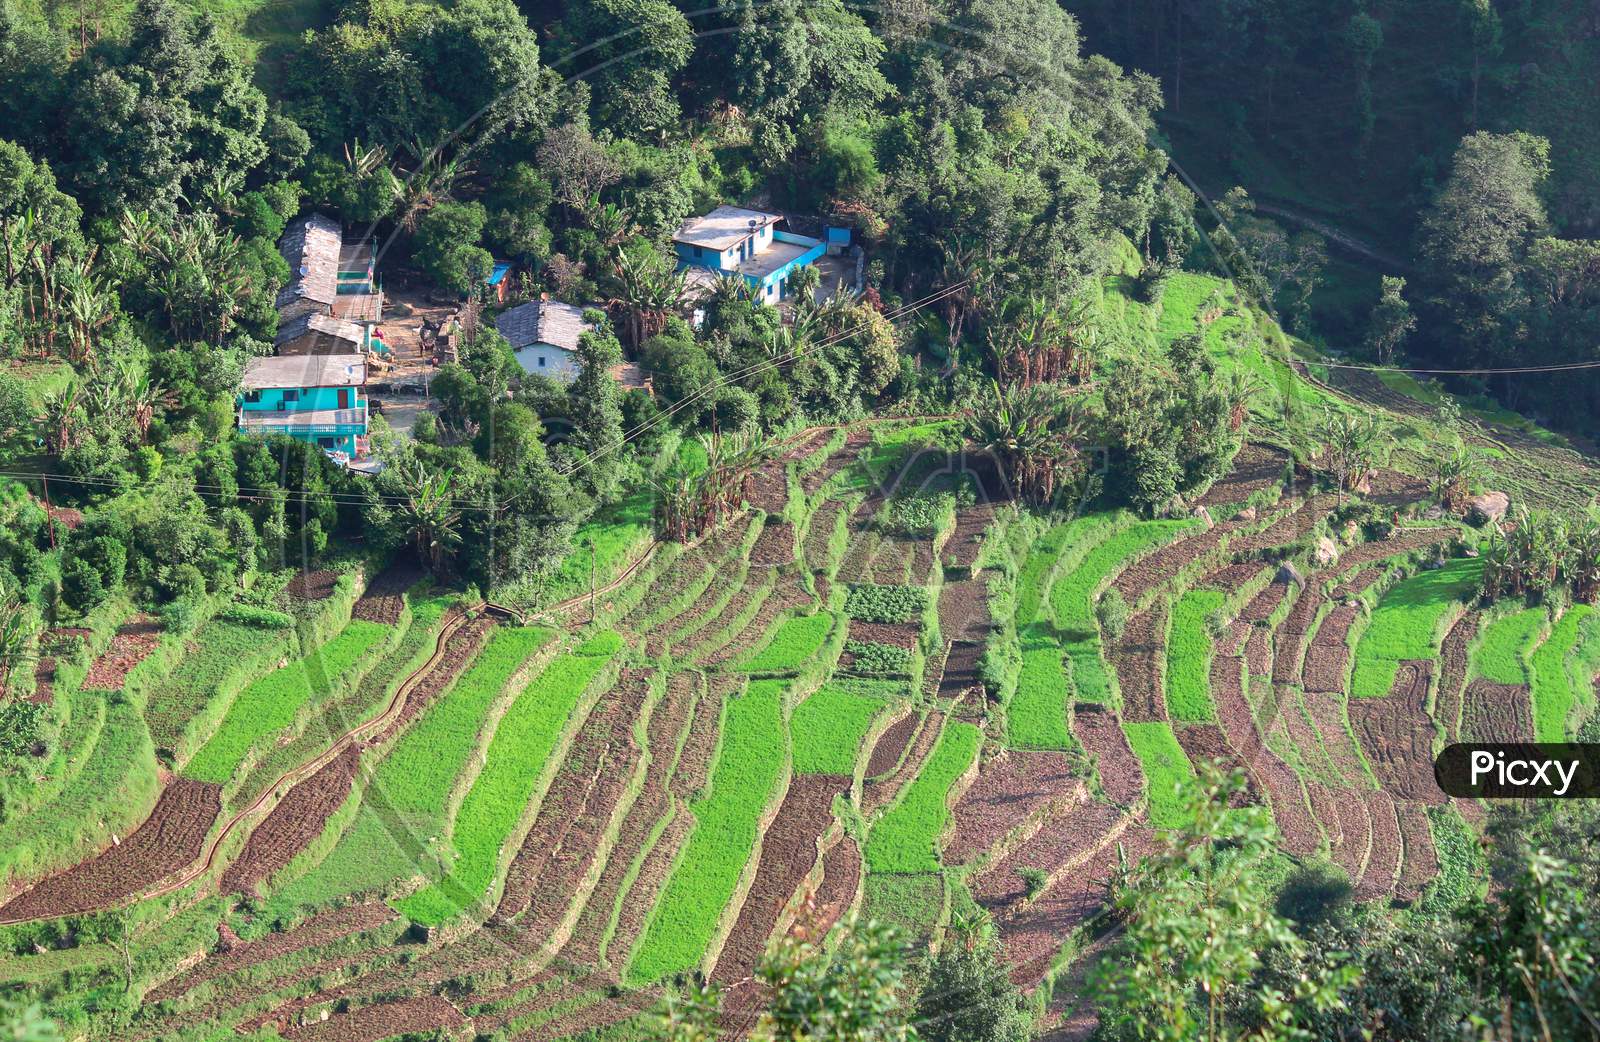 A Landscape Photo Showing Terrace Farming In North India.